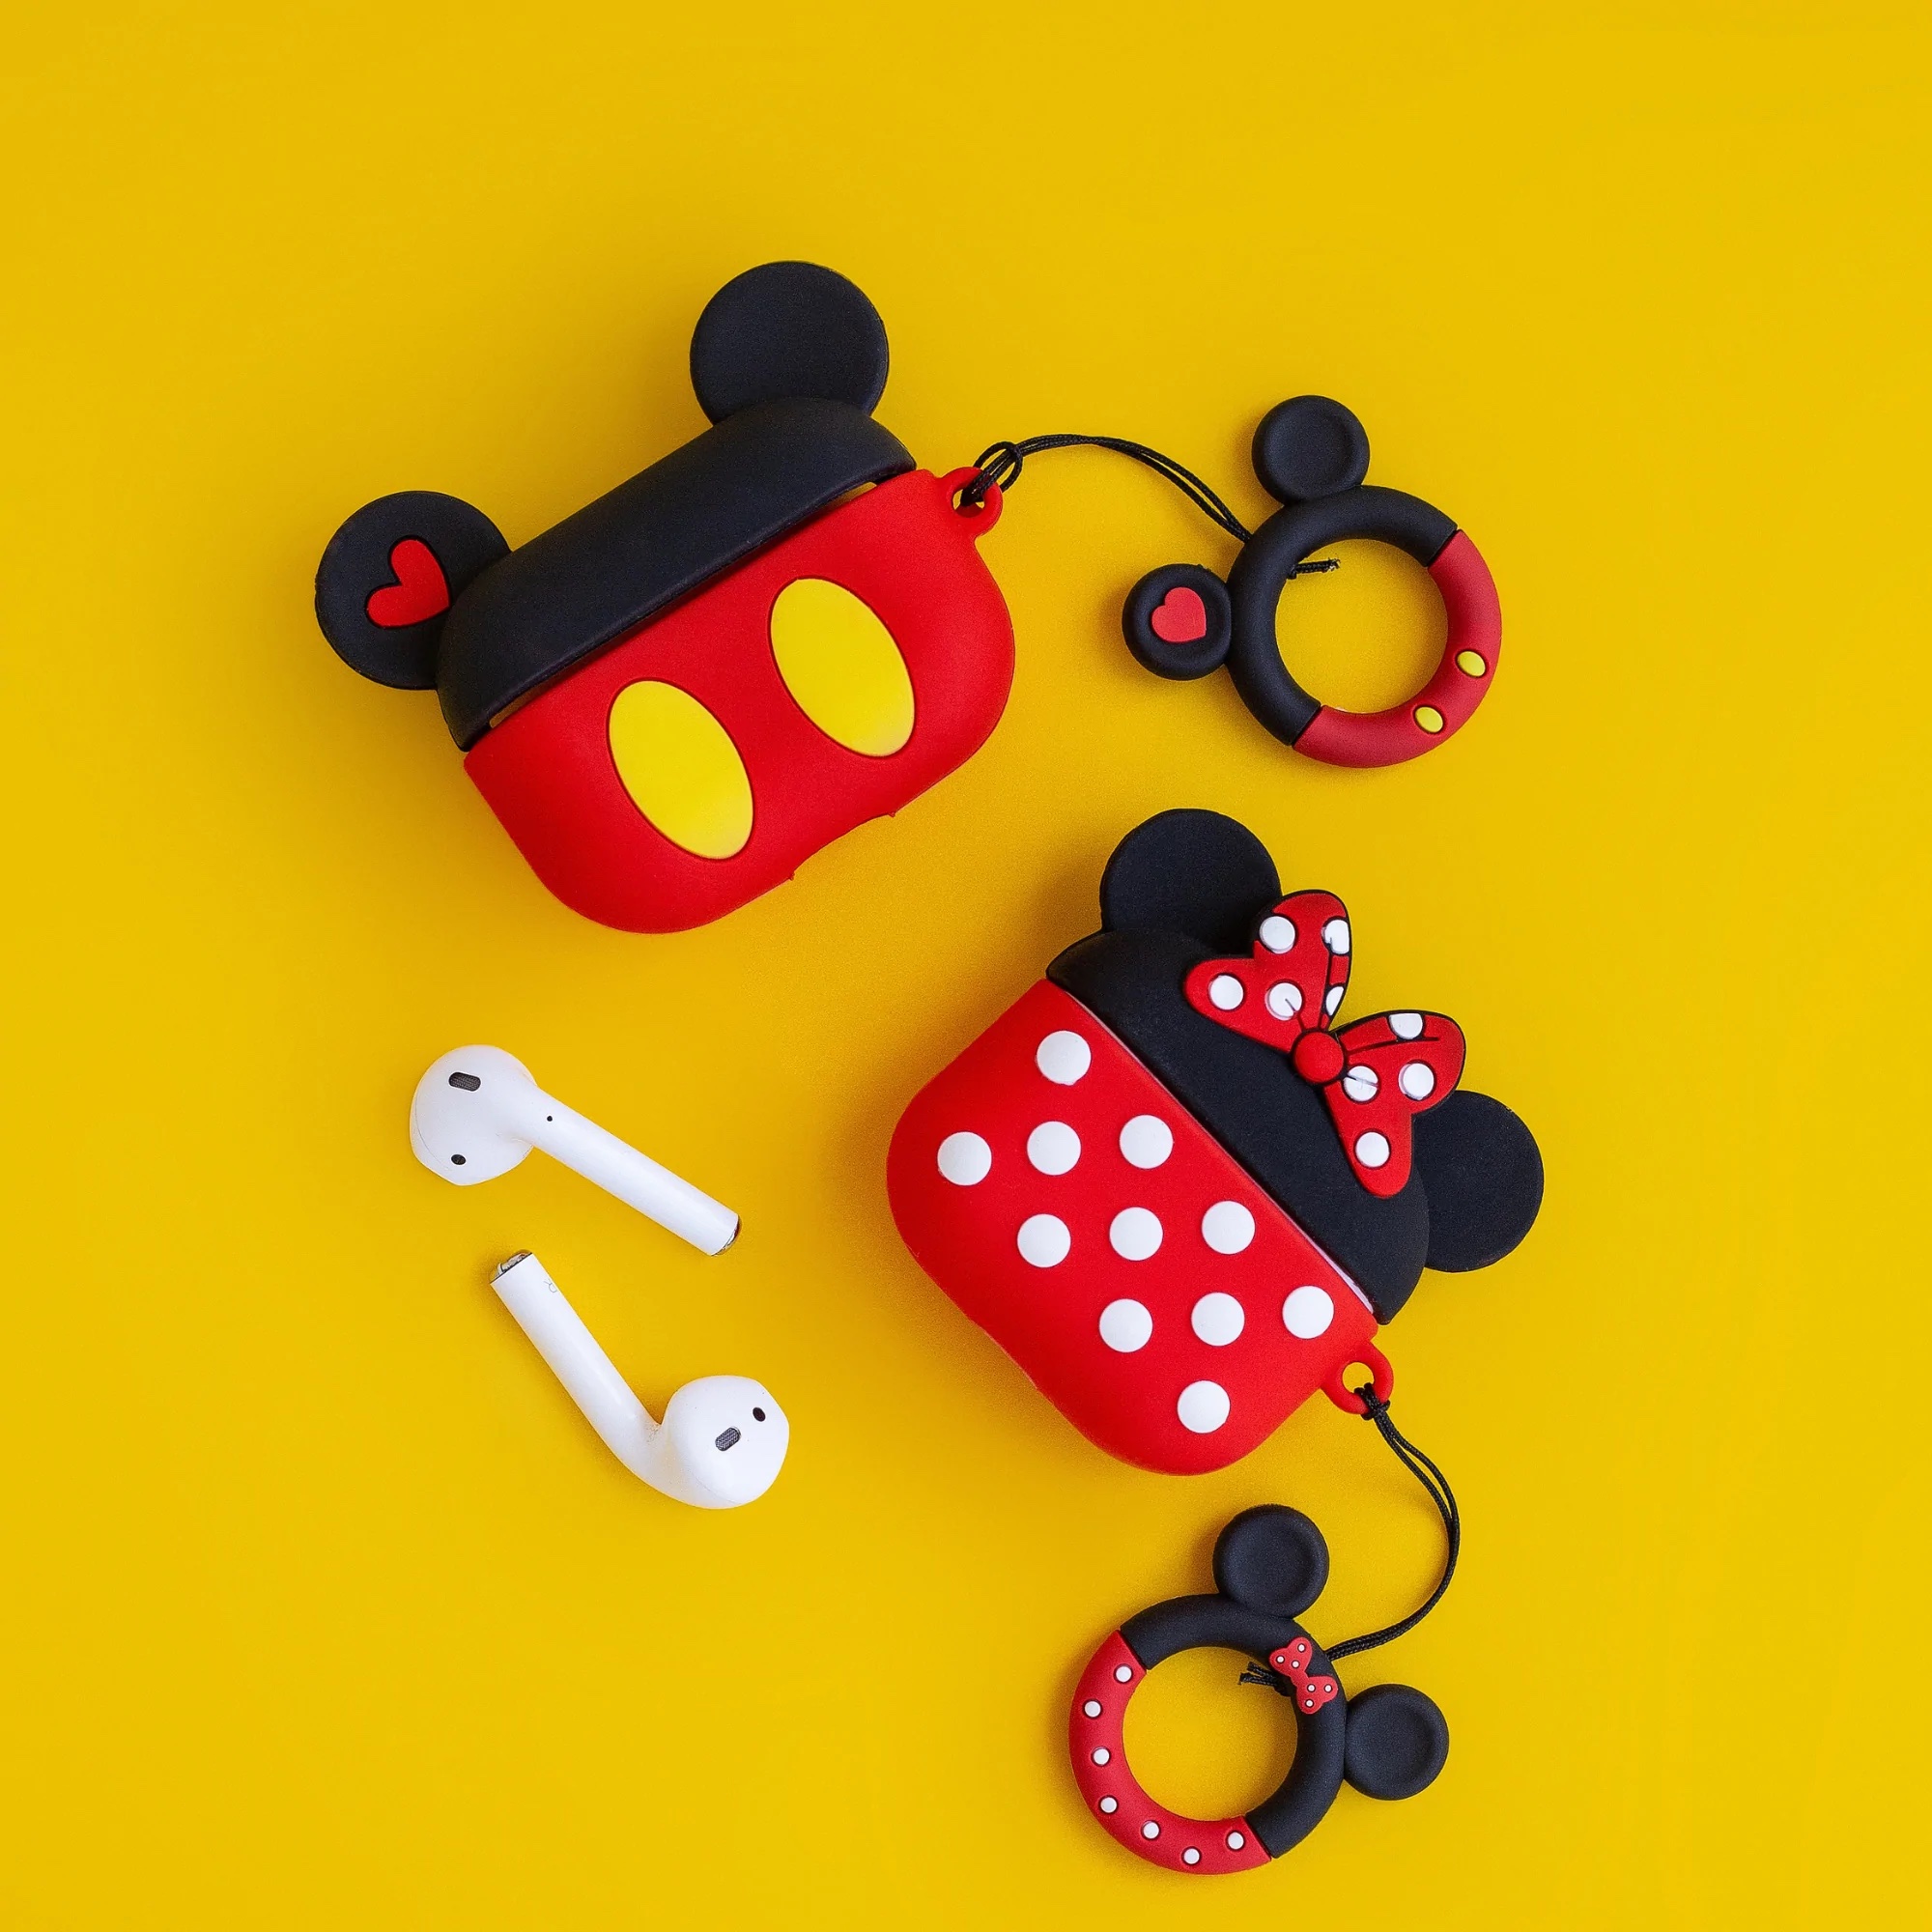 Silicone Airpods Case Manufacturer, Custom Airpod Cover Supplier